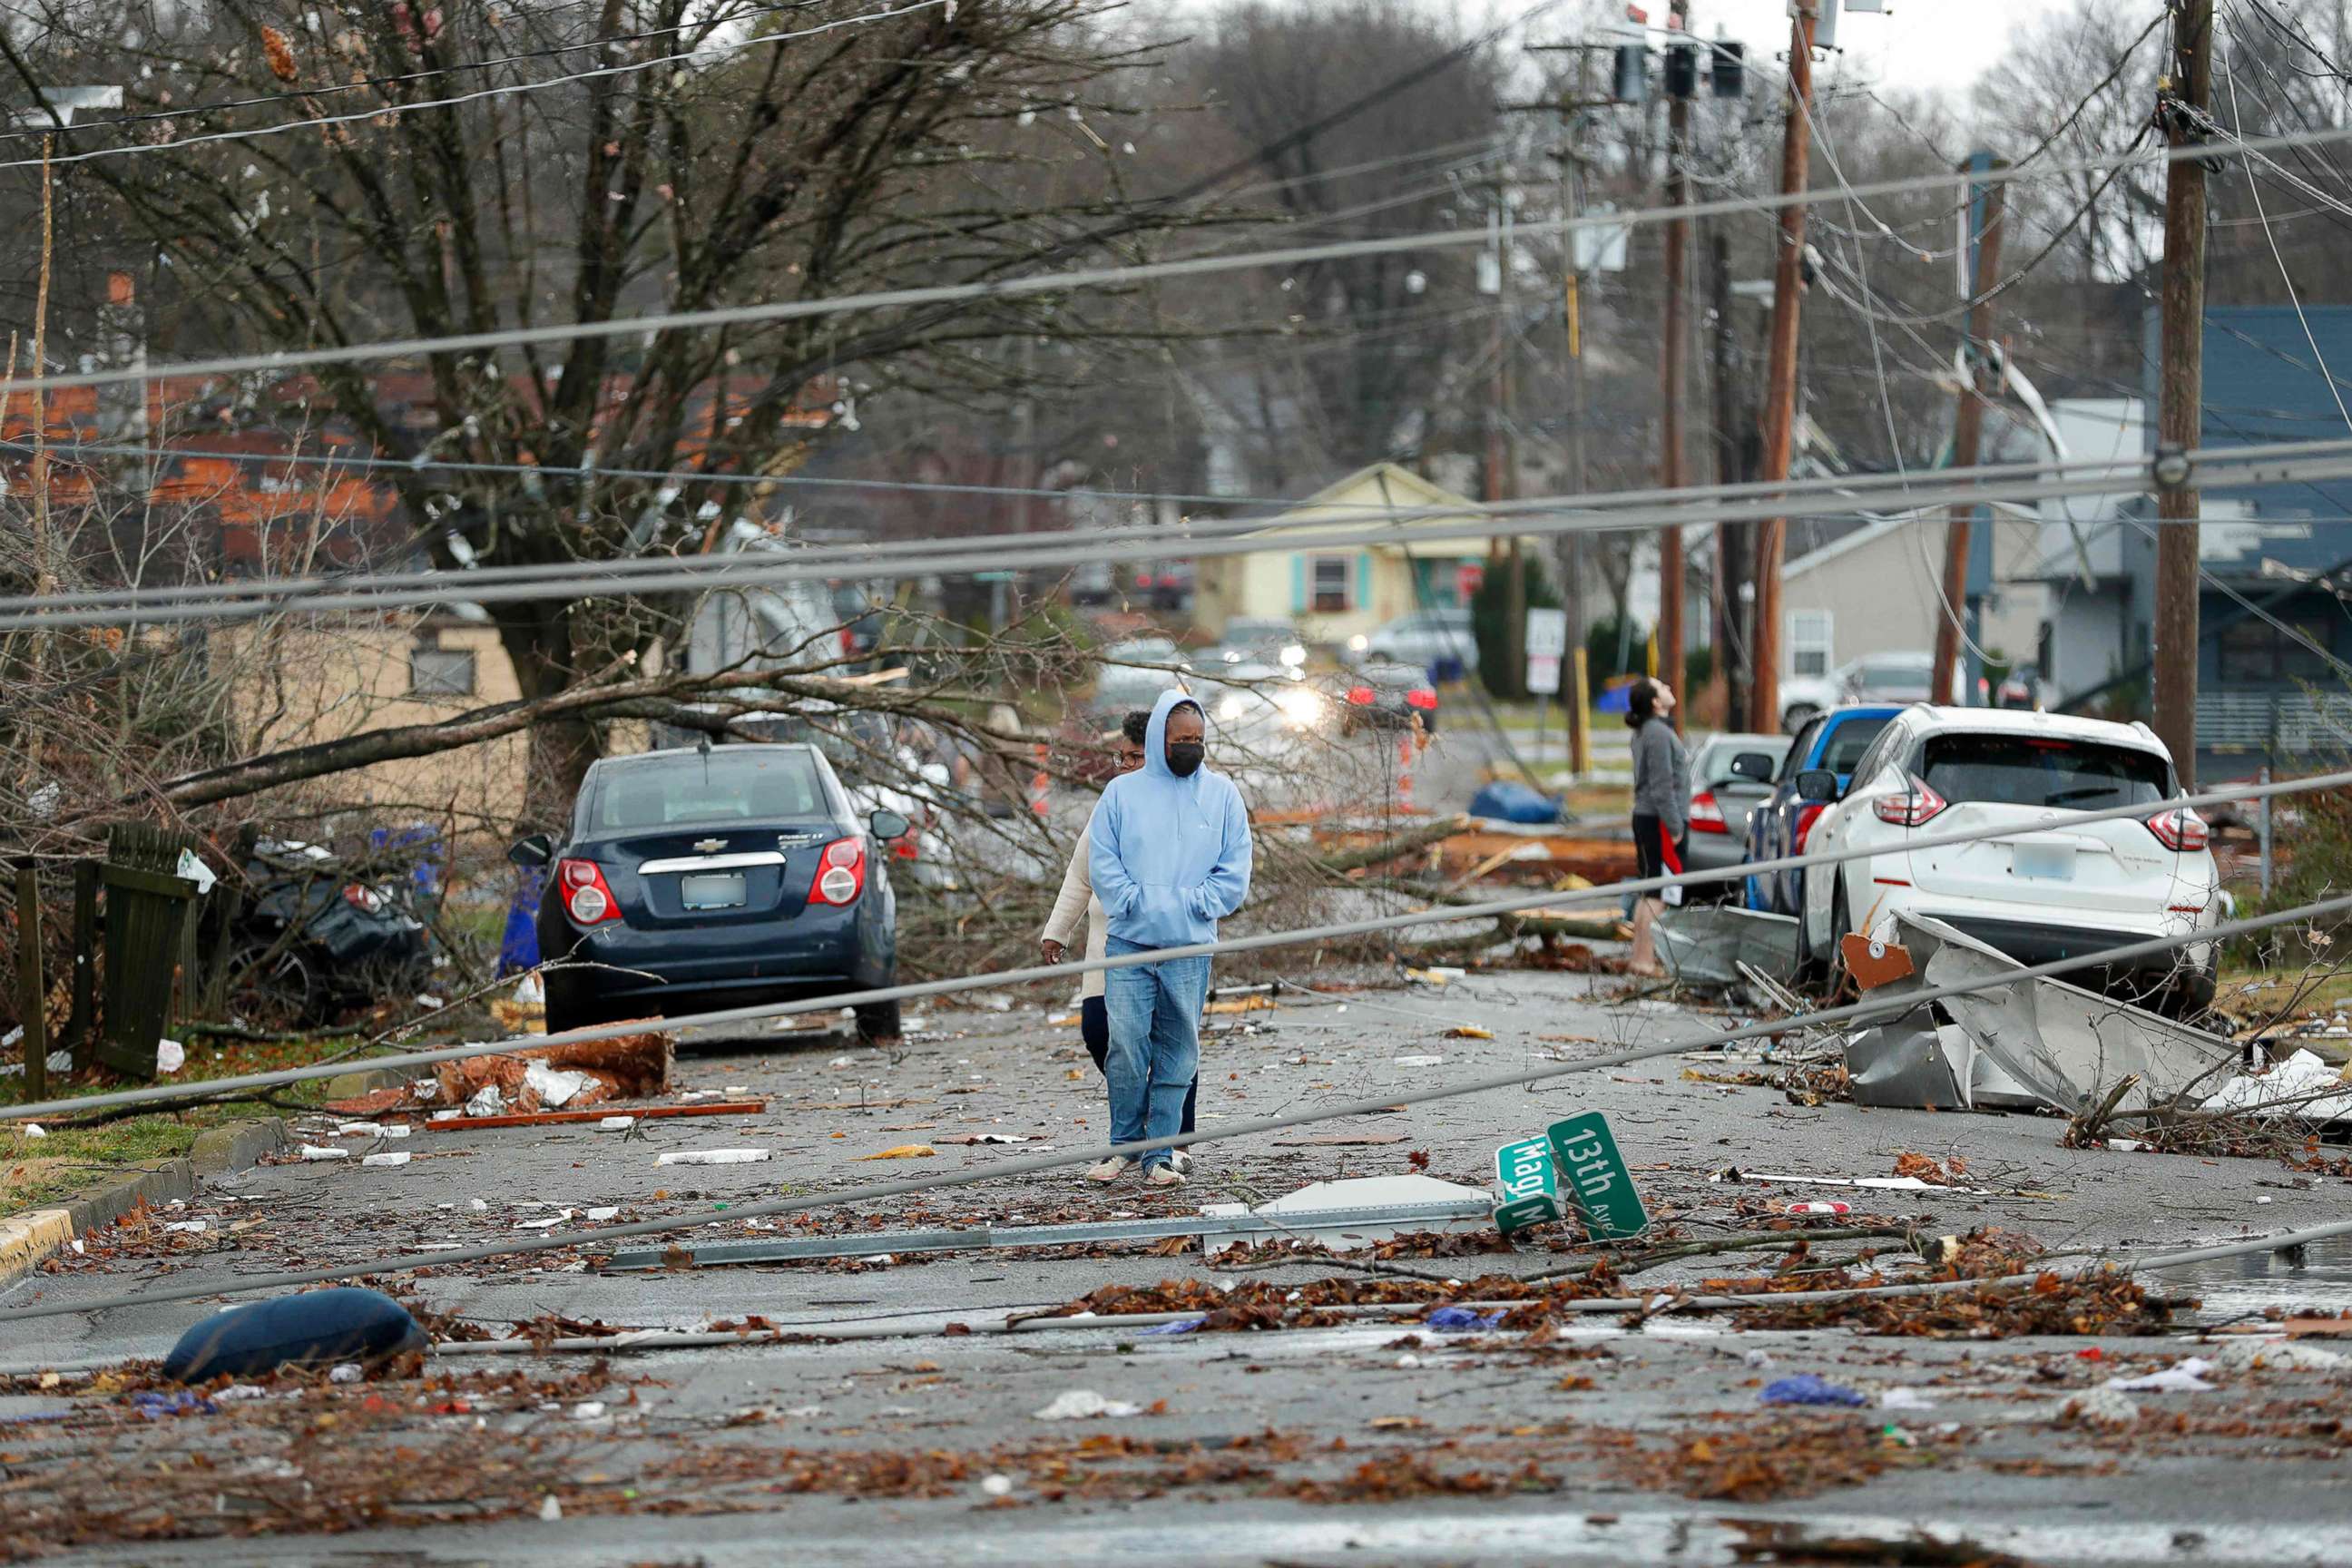 PHOTO: Residents look at the damage following a tornado that struck the area, Dec. 11, 2021, Bowling Green, Ky.